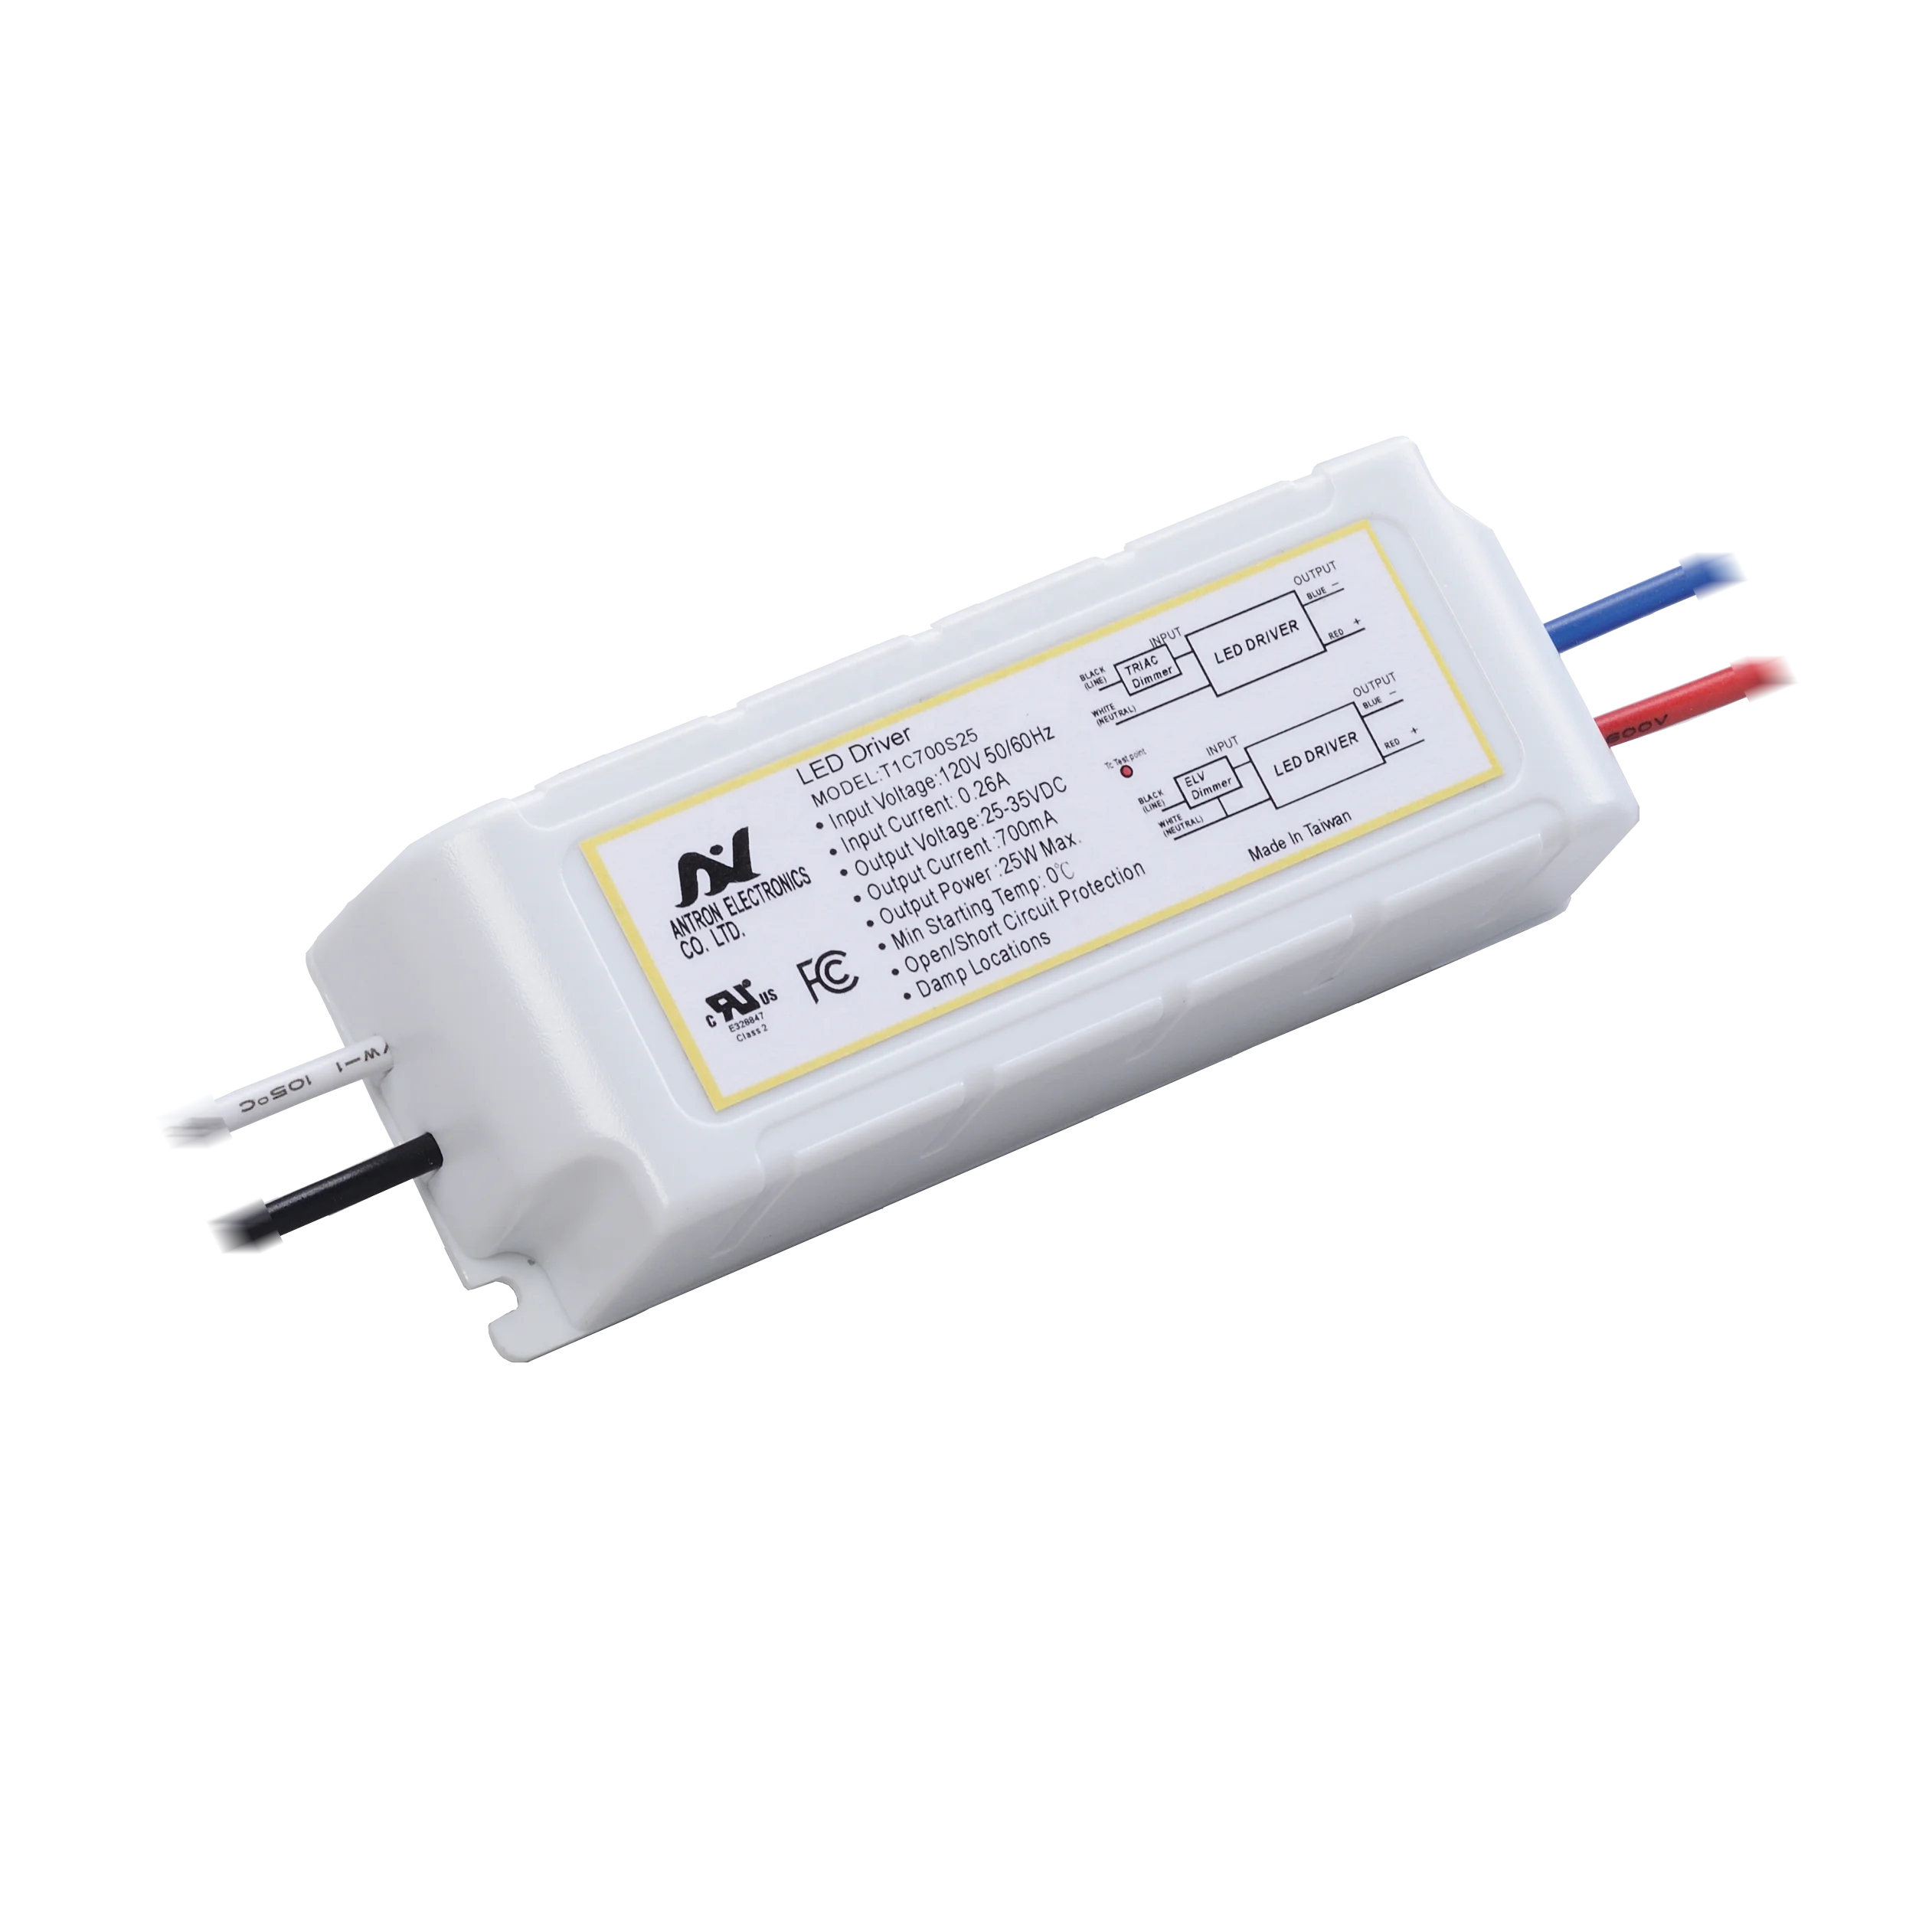 PFC 25W Dimmable Driver LED Triac Power Supply